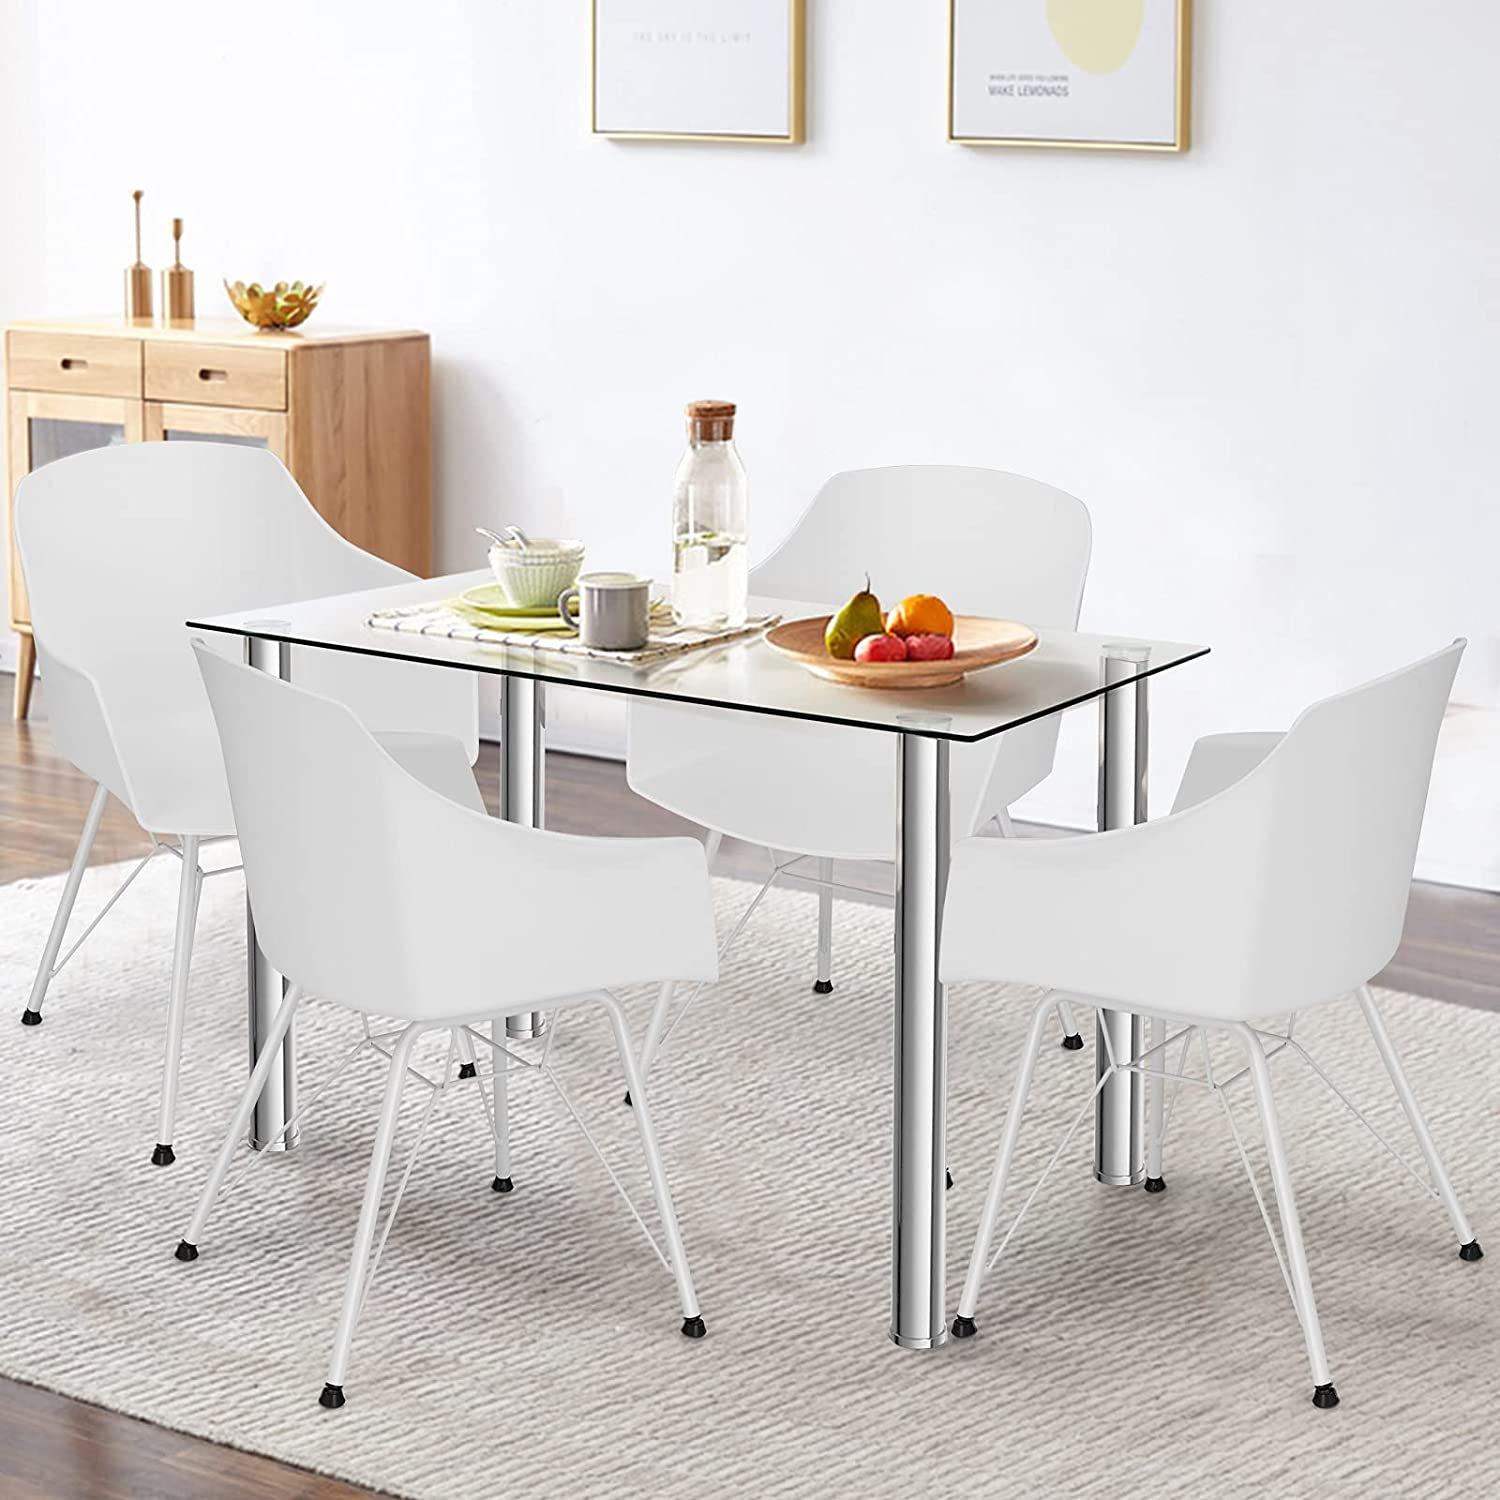 Giantex 5-Piece Dining Table Set, Kitchen Table with Tempered Glass Table Top and 4 Chairs (White)